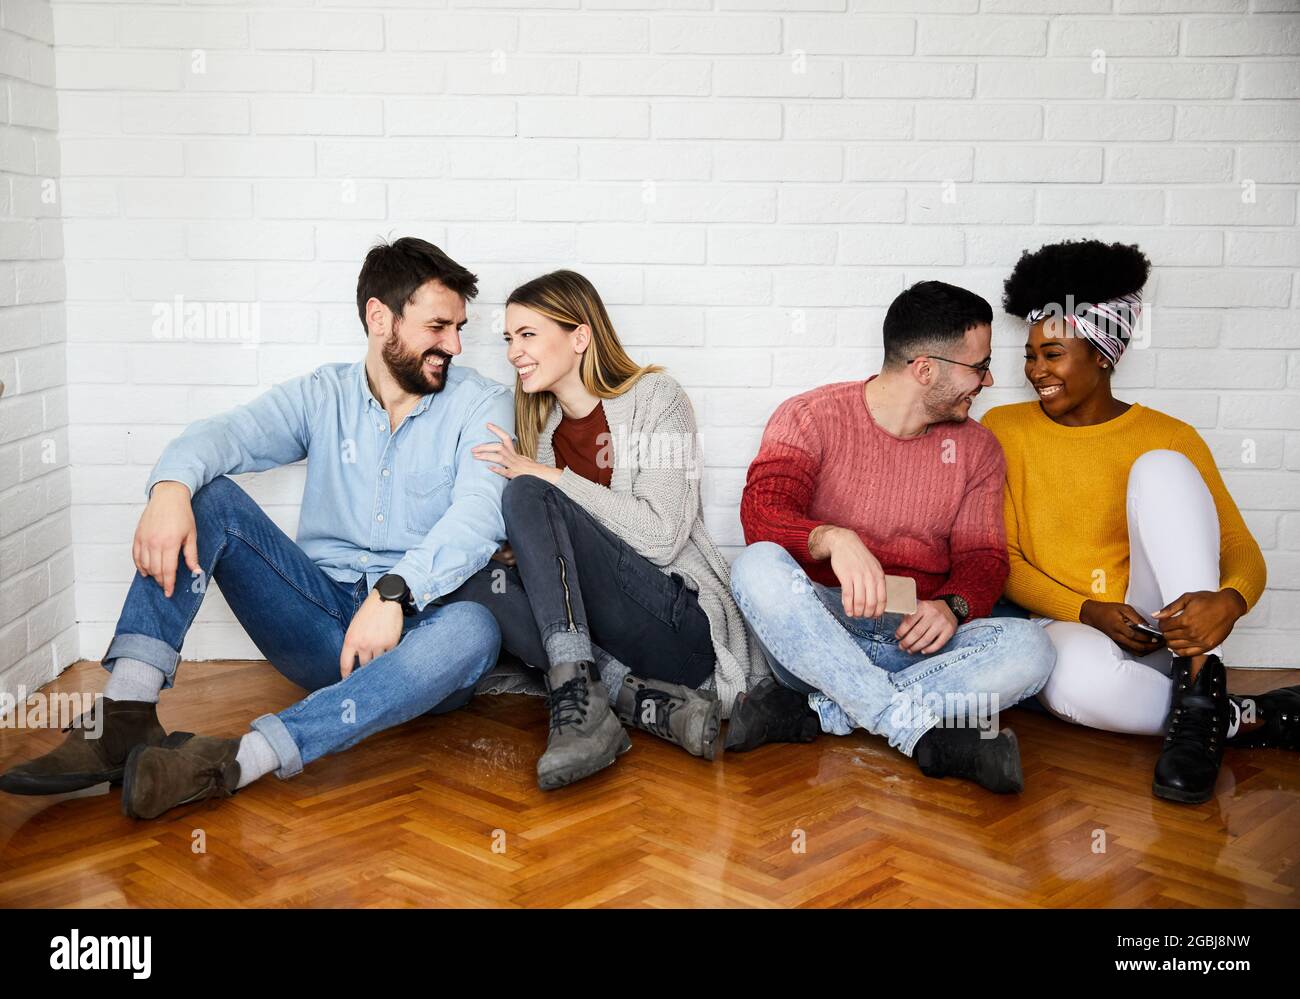 young people having fun happy group friendship student lifestyle friend party youth cheerful couple Stock Photo